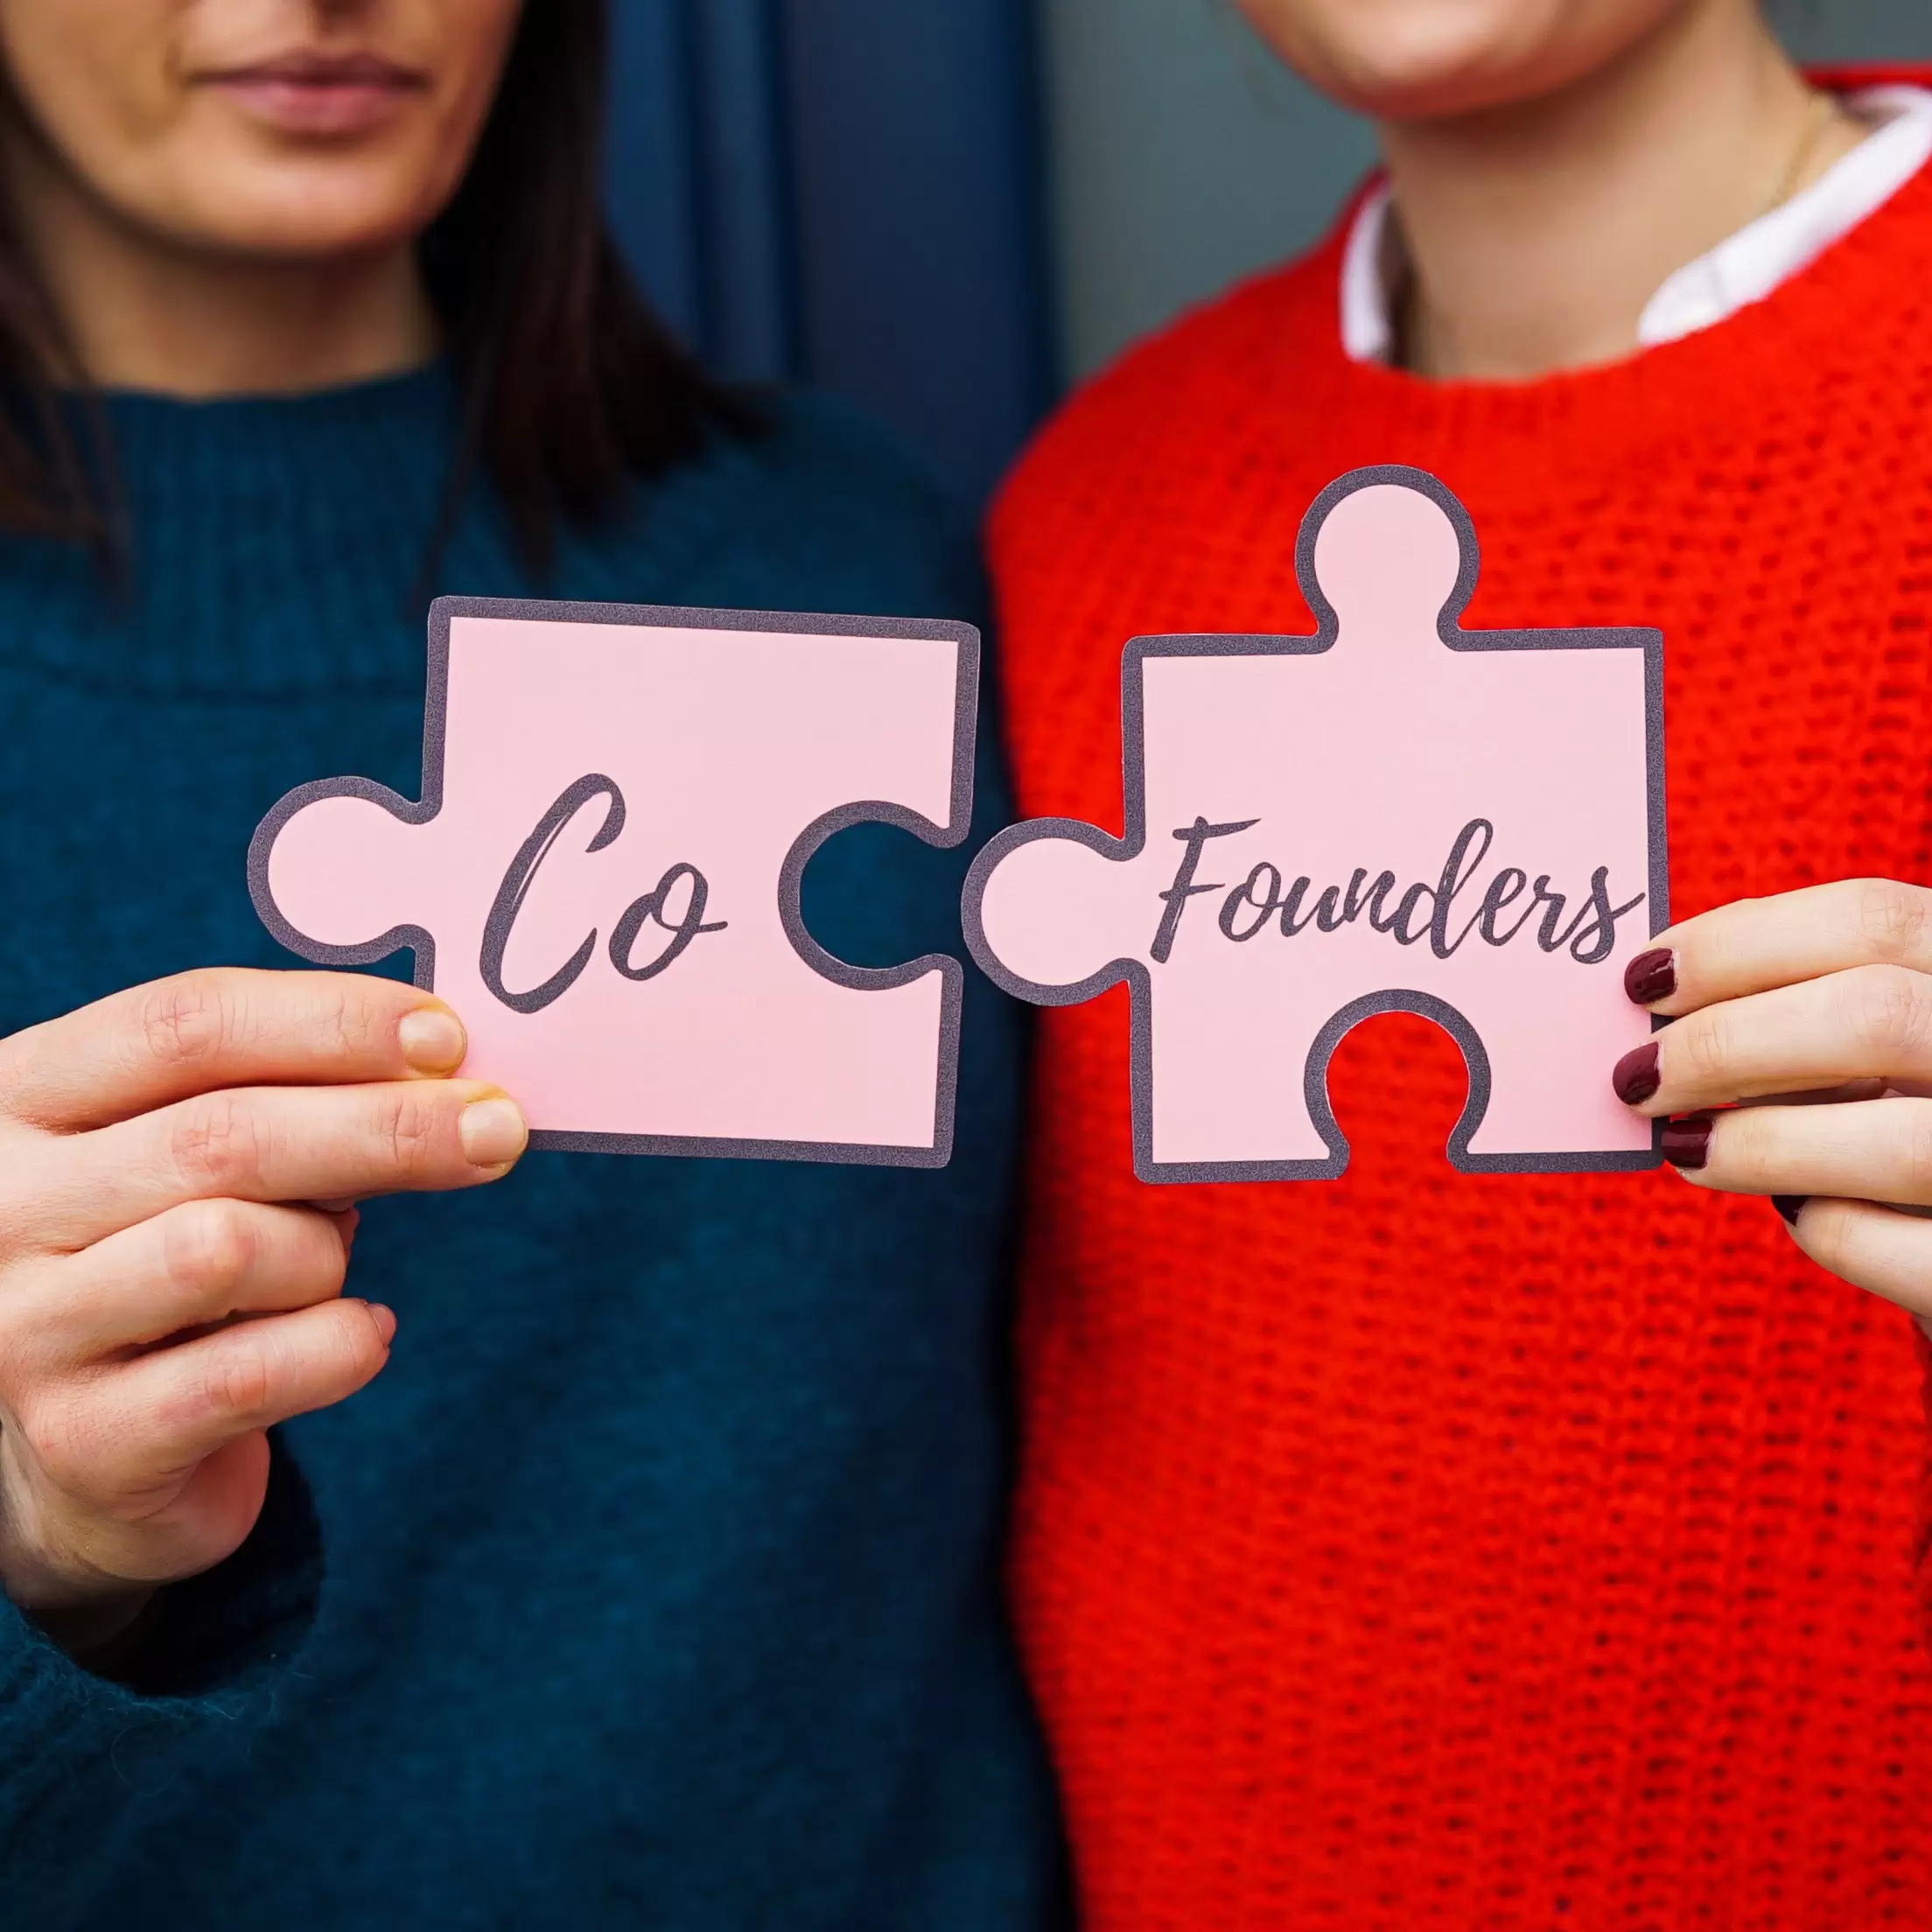 Co-founders jigsaw puzzle pieces